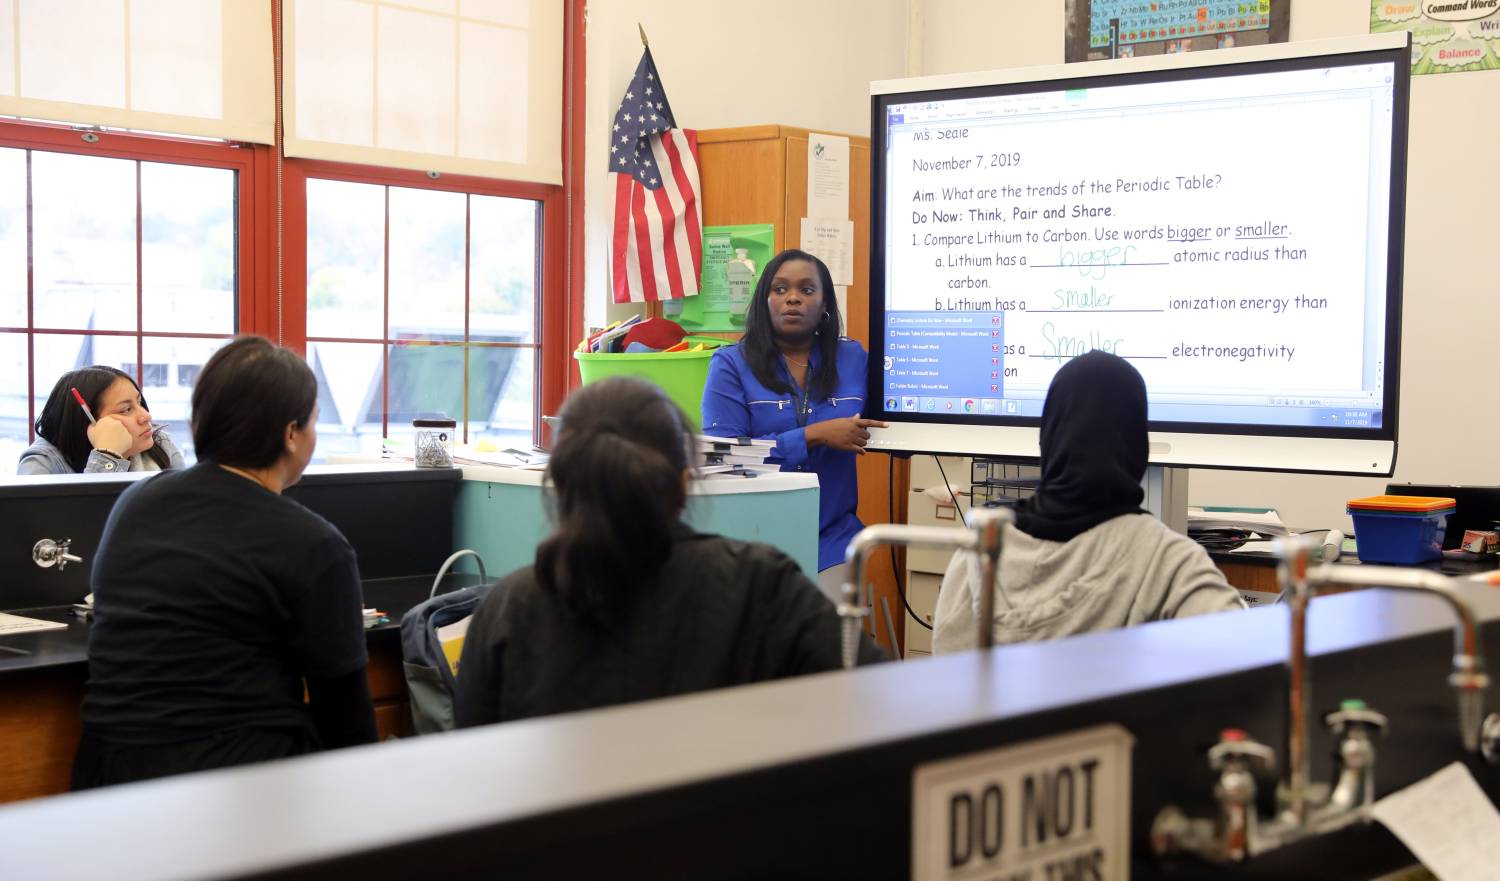 Chemistry teacher Lisa Seale teaches a lesson about the periodic table at Roosevelt High School - Early College Studies Nov. 7, 2019 in Yonkers.Immigrant Students